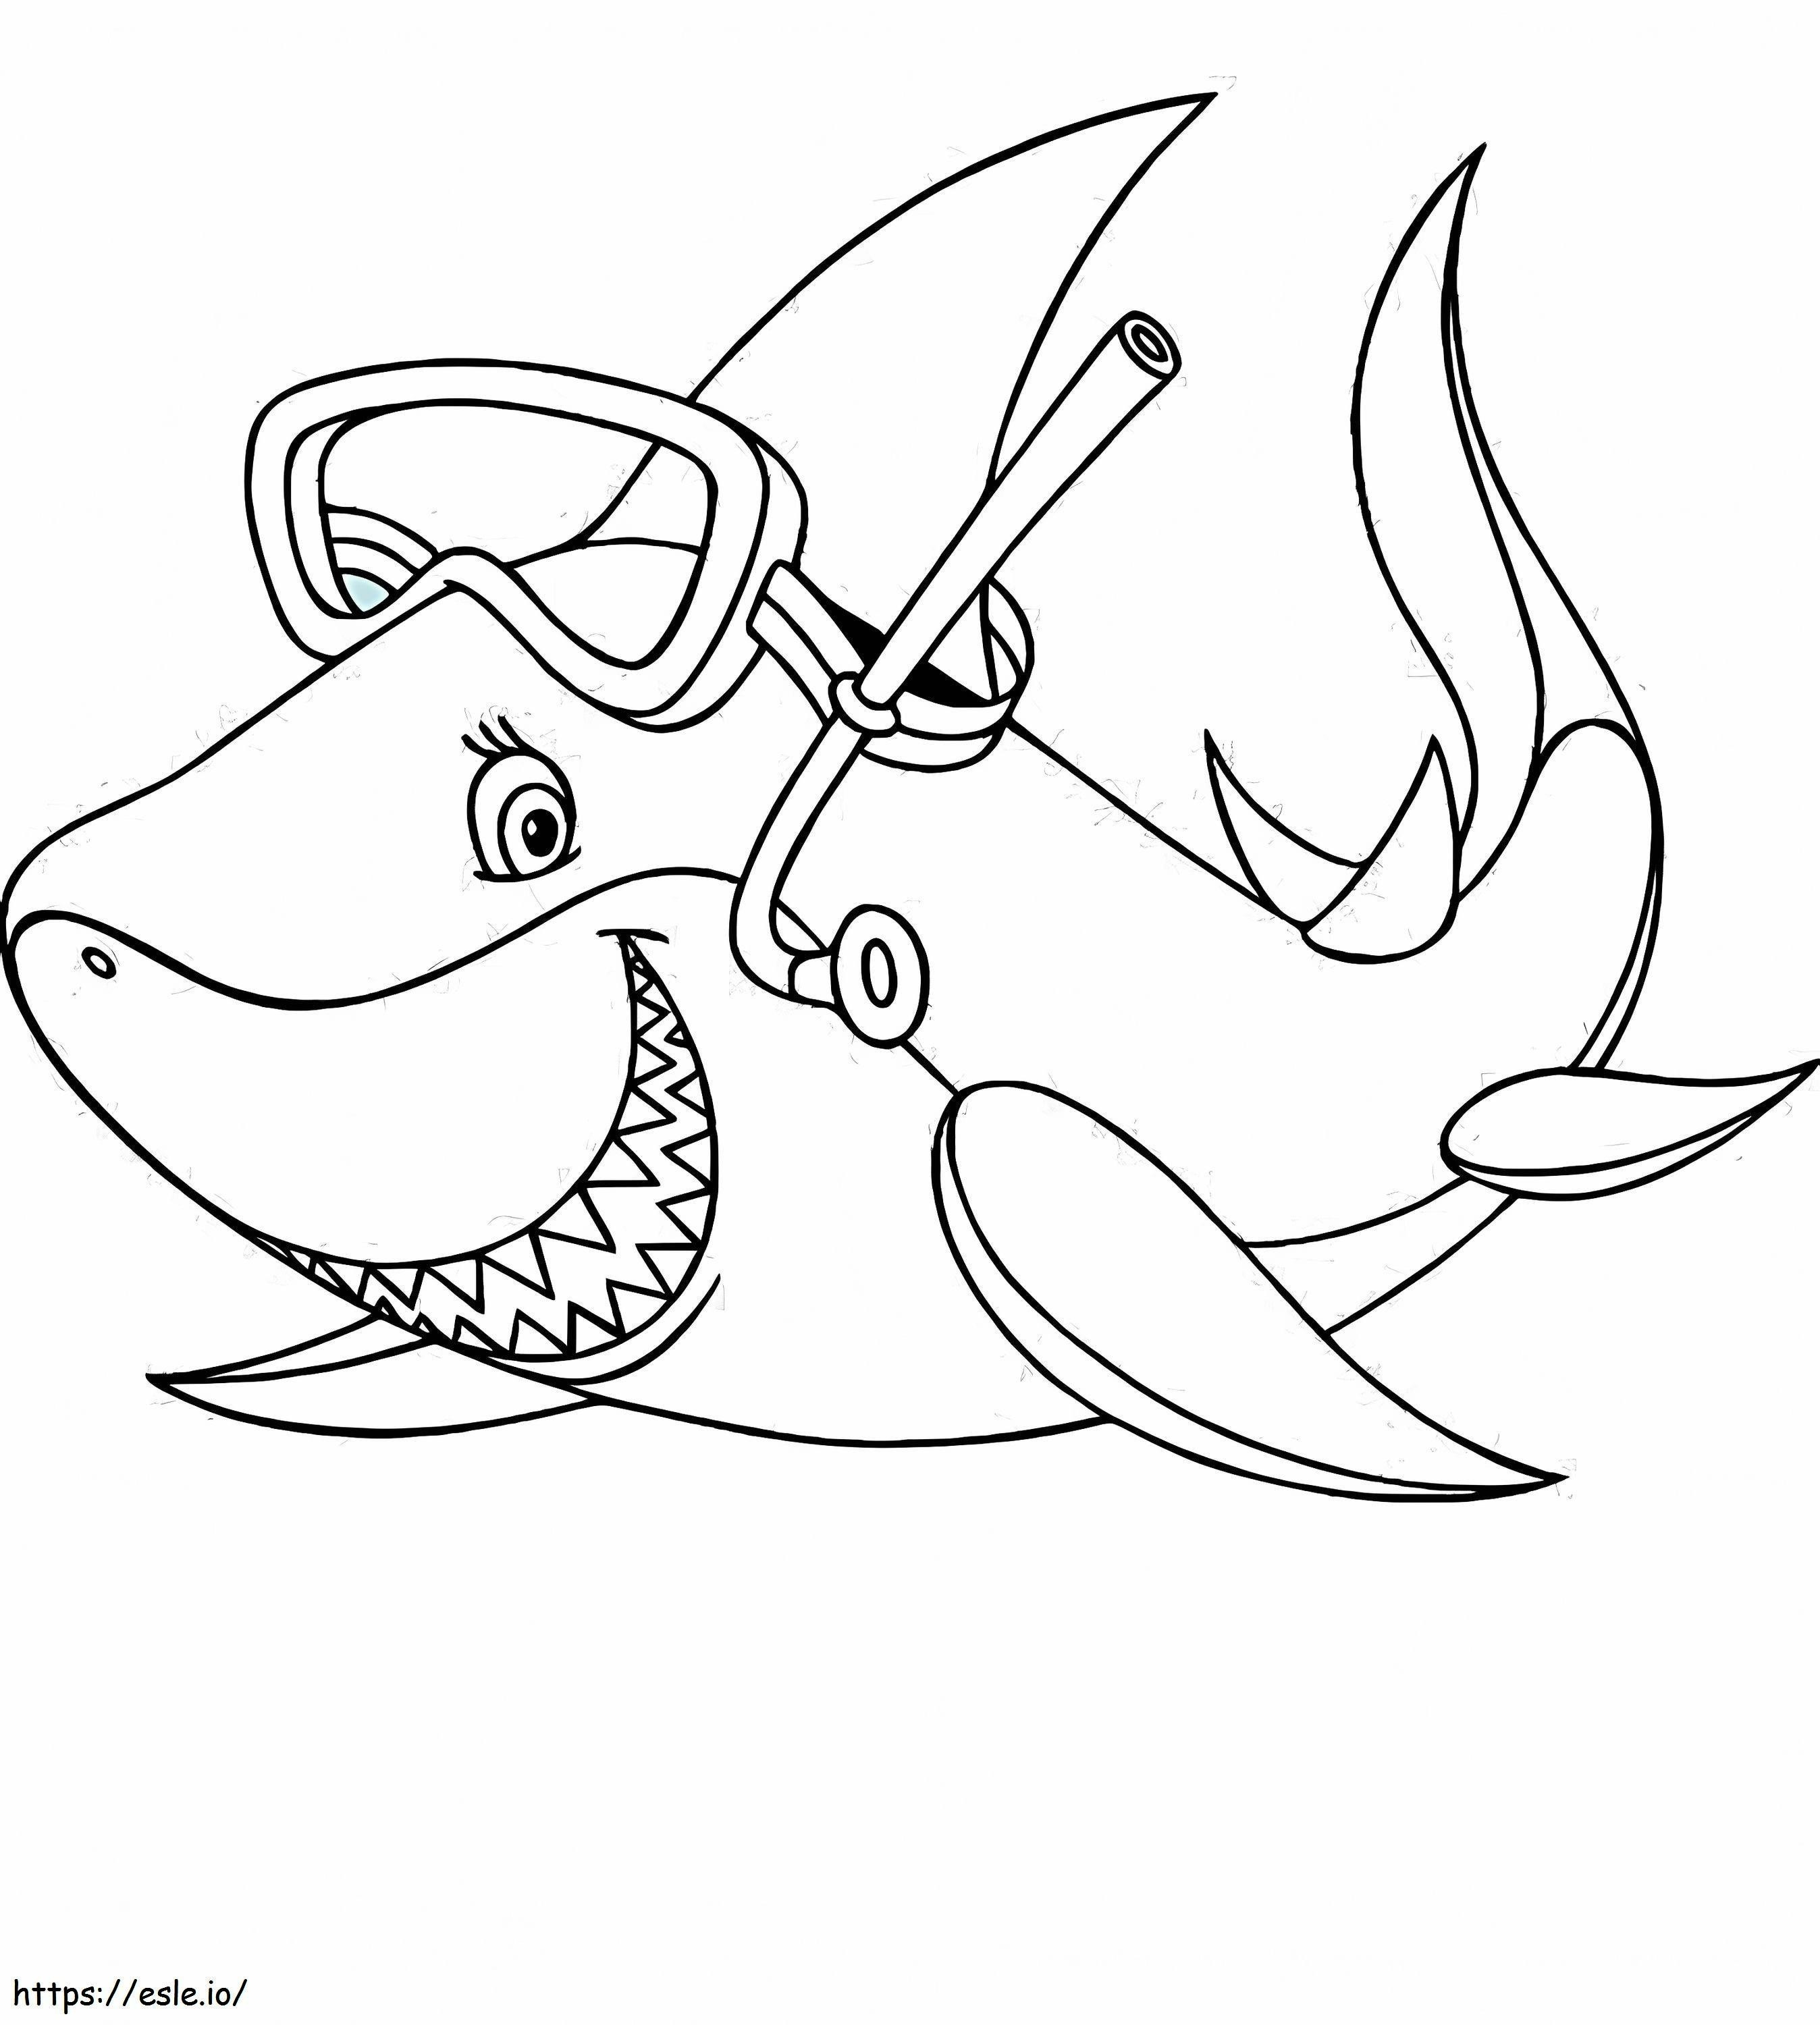 1541748815_Coloring Page Of A Shark New Shark Of Of A Shark coloring page